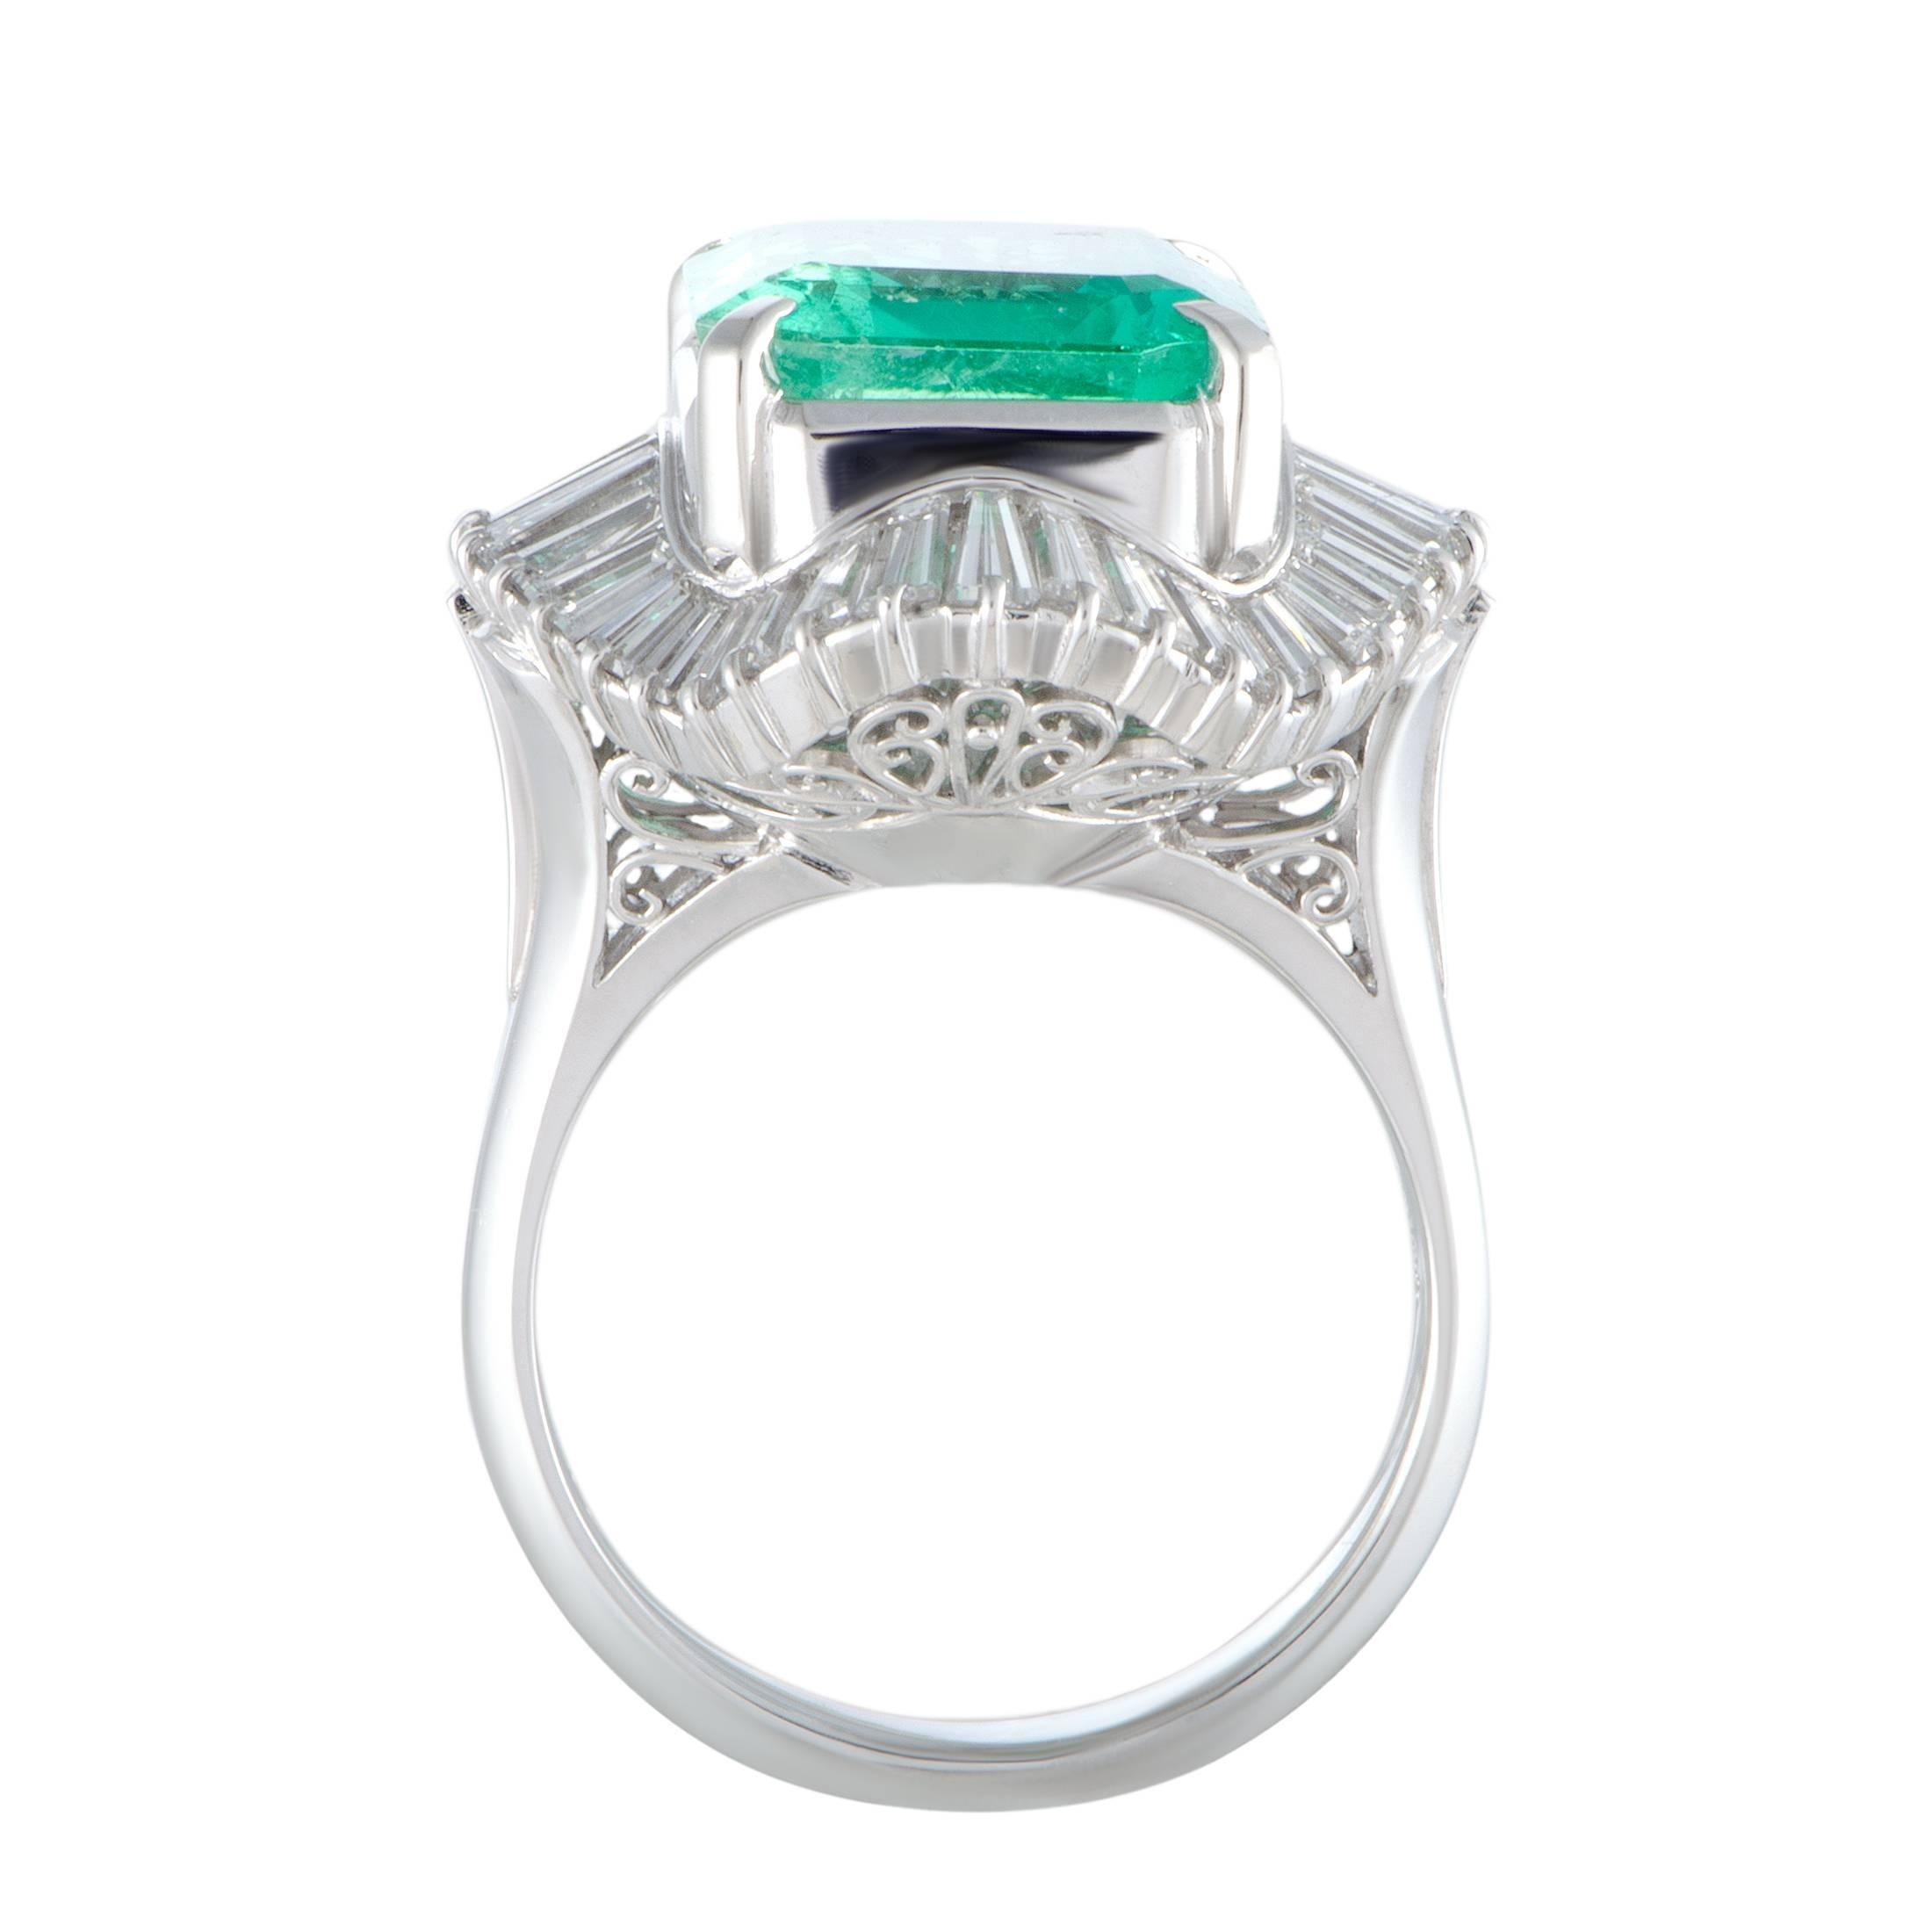 The regal appeal of emerald is brought to a whole new level in this ravishing ring thanks to the lustrous resplendence of diamonds and the elegant gleam of platinum. The emerald weighs 6.40 carats while the diamonds amount to 1.90 carats.
Ring Top